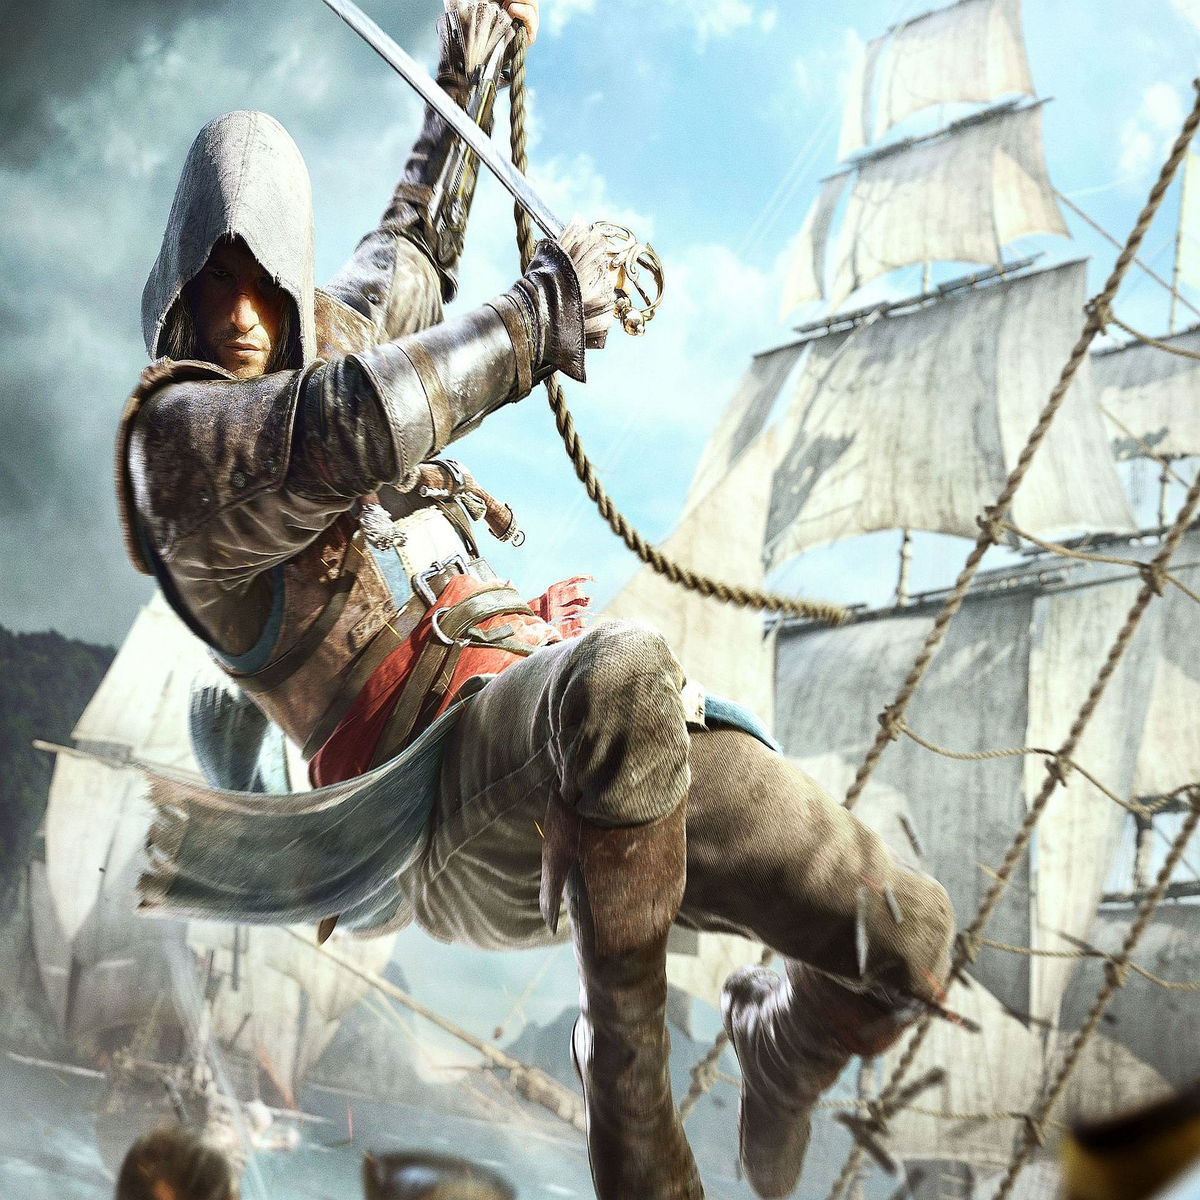 Get five Assassin's Creed games for free on PS4, PS5, Xbox and PC, Gaming, Entertainment